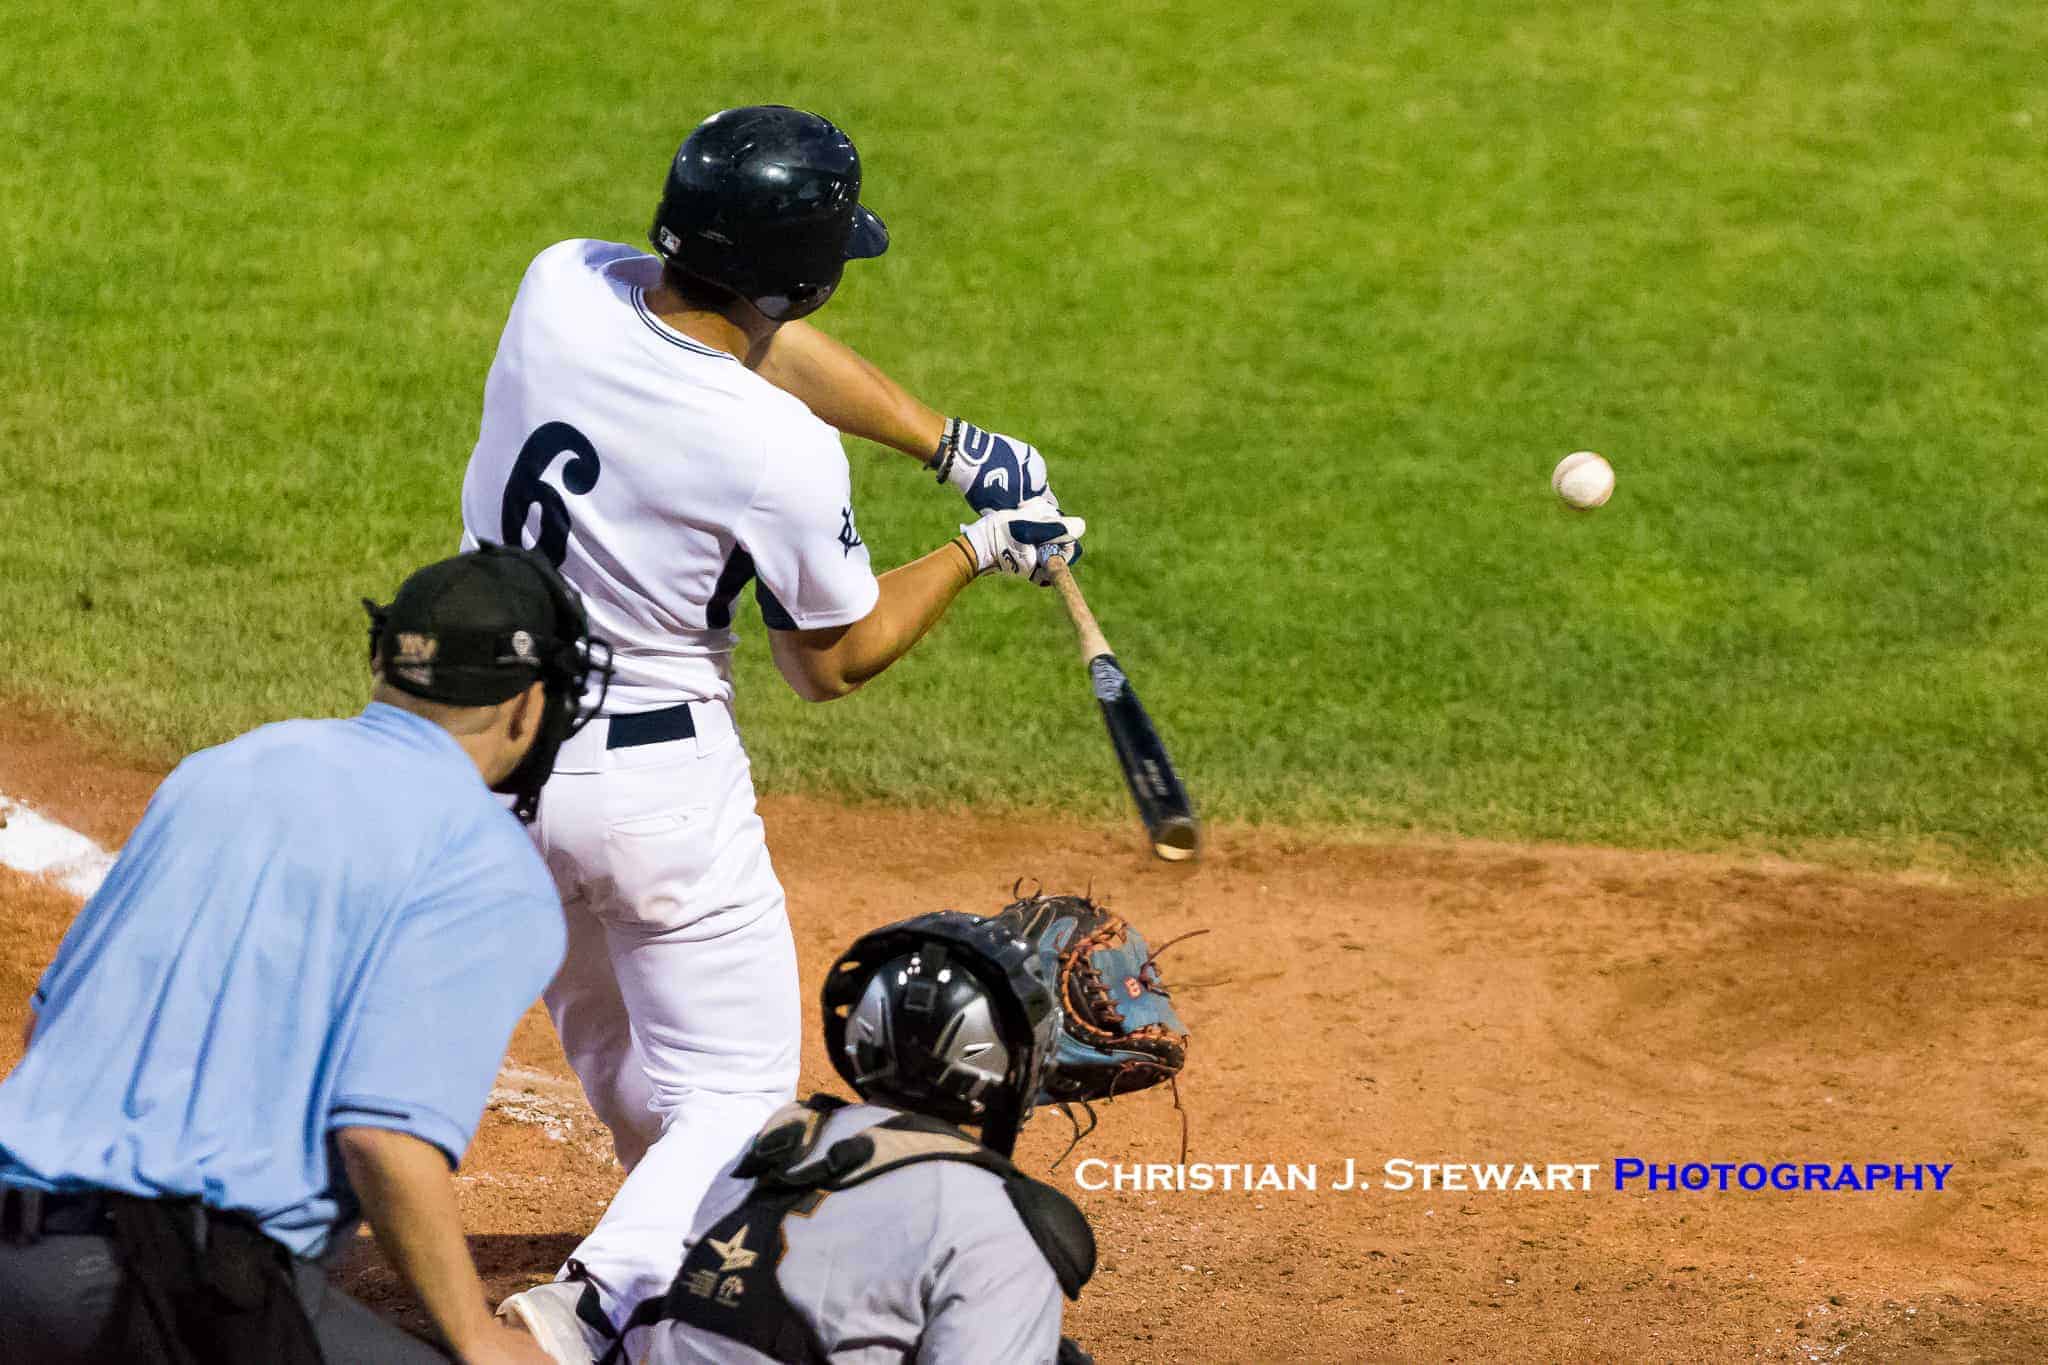 Fireworks Come Early, HarbourCats Stage Dramatic Comeback to Give Eccles First League Win